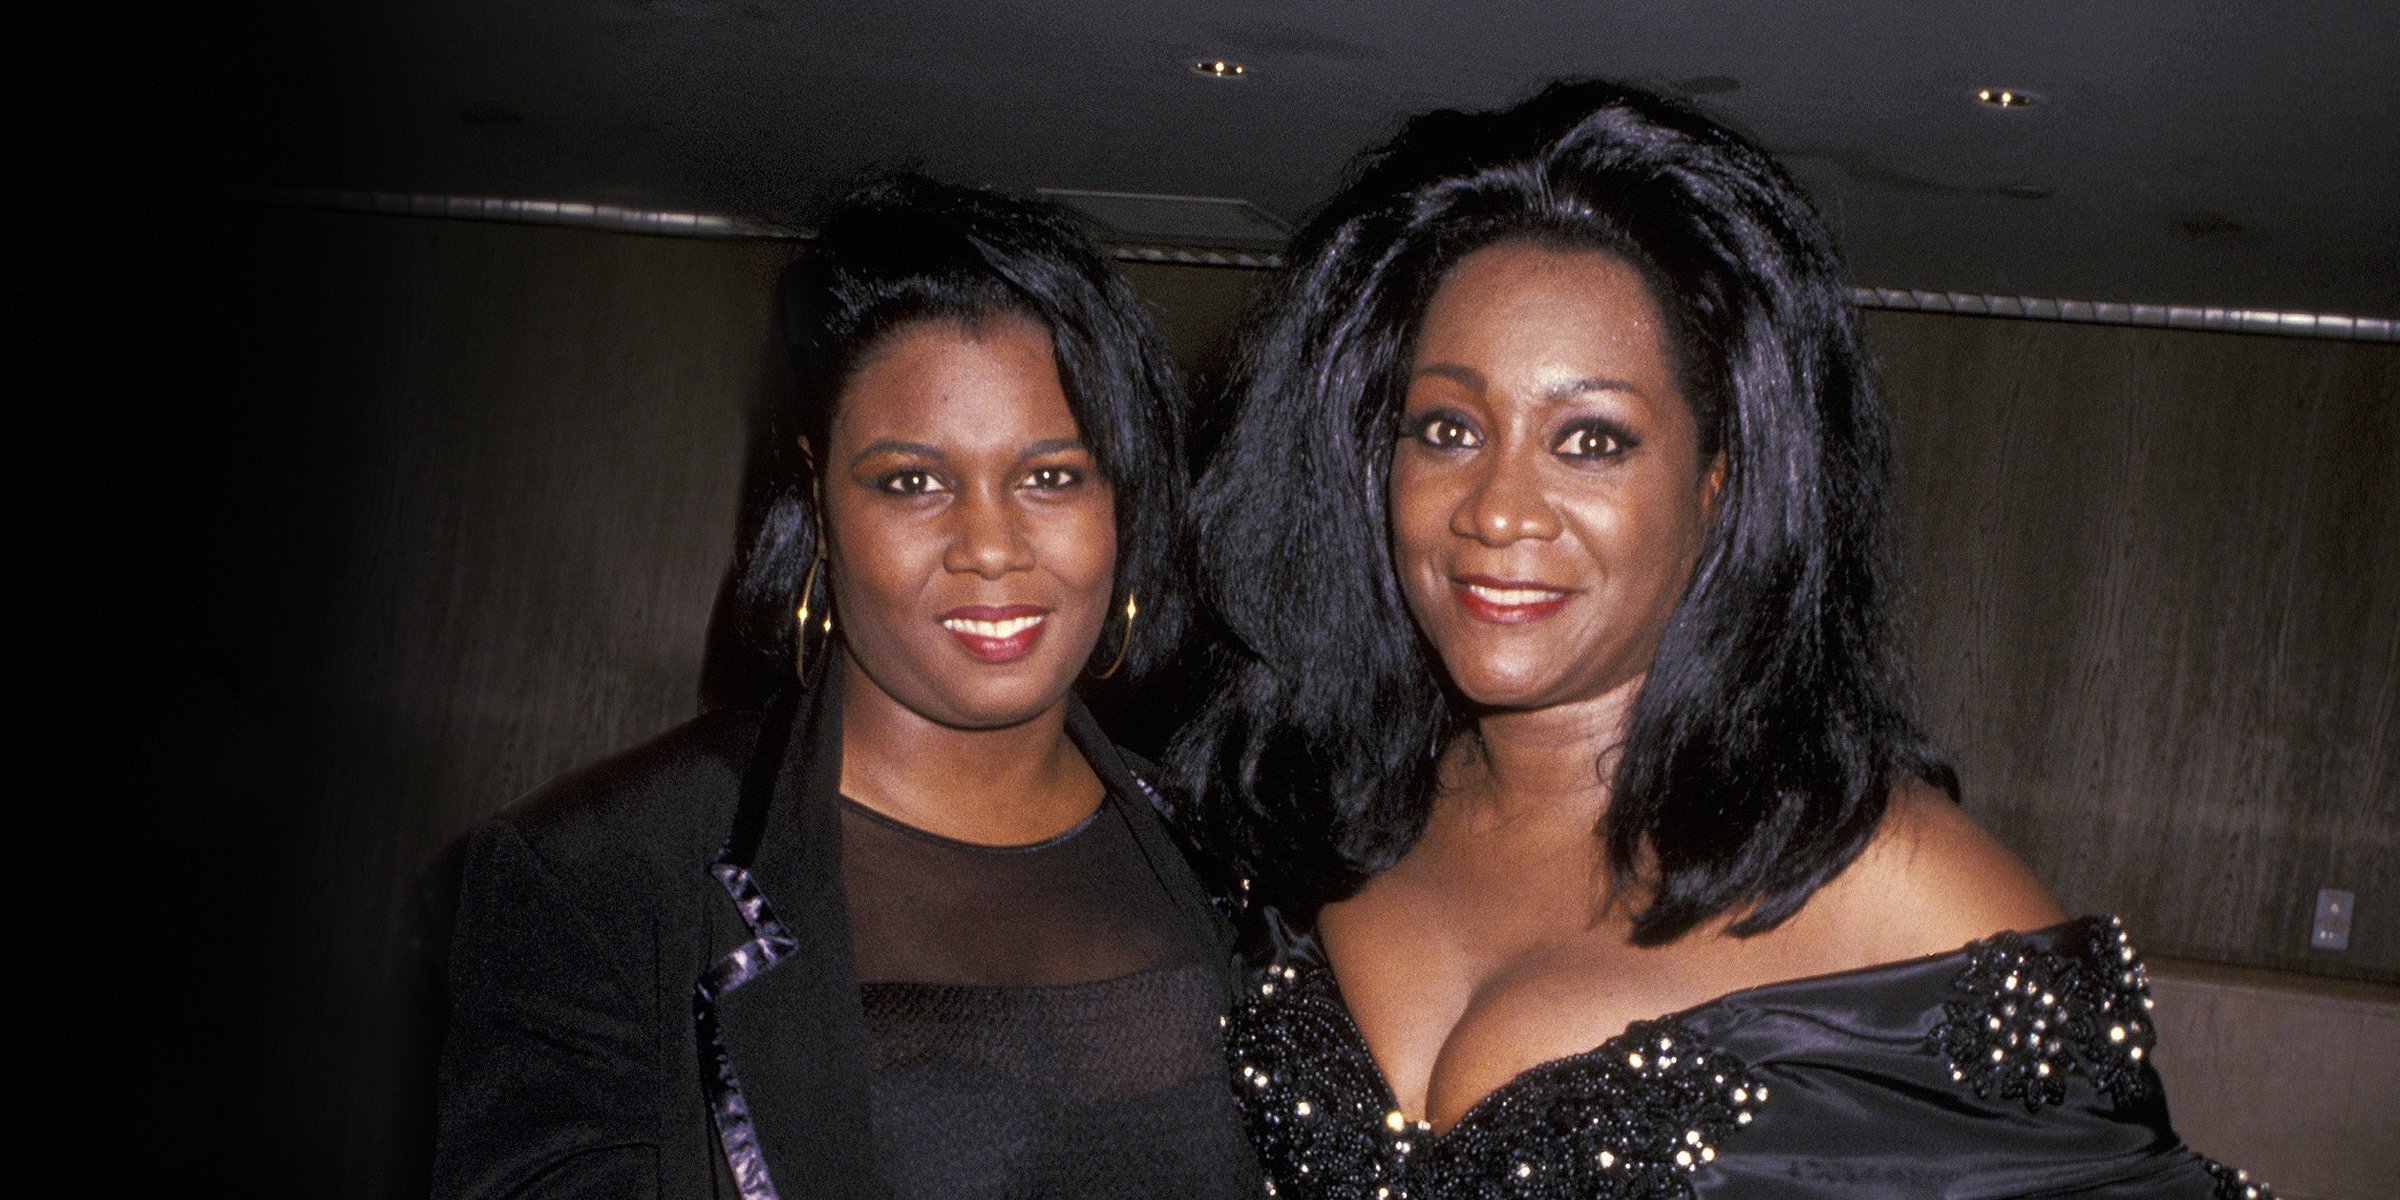 Stayce Holte and Patti LaBelle. | Source: Getty Images